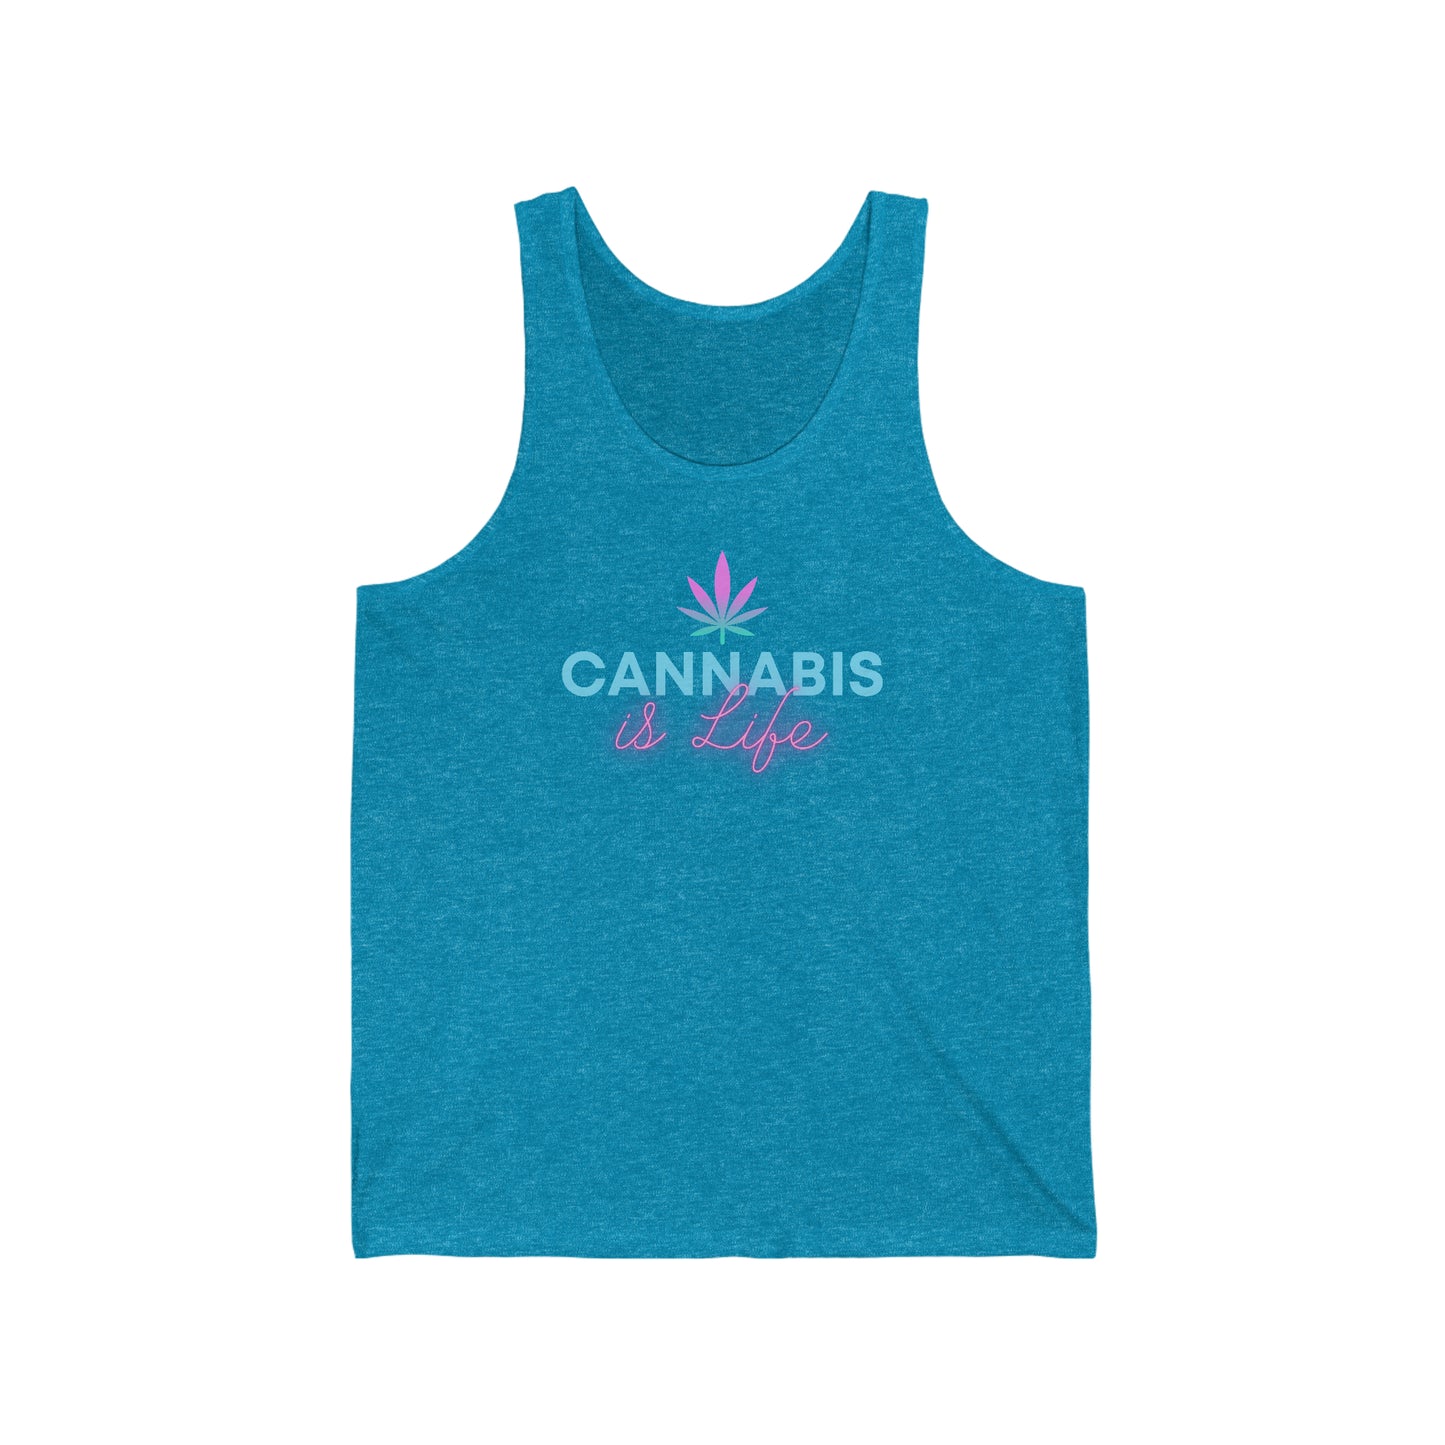 Cannabis is Life Jersey Tank